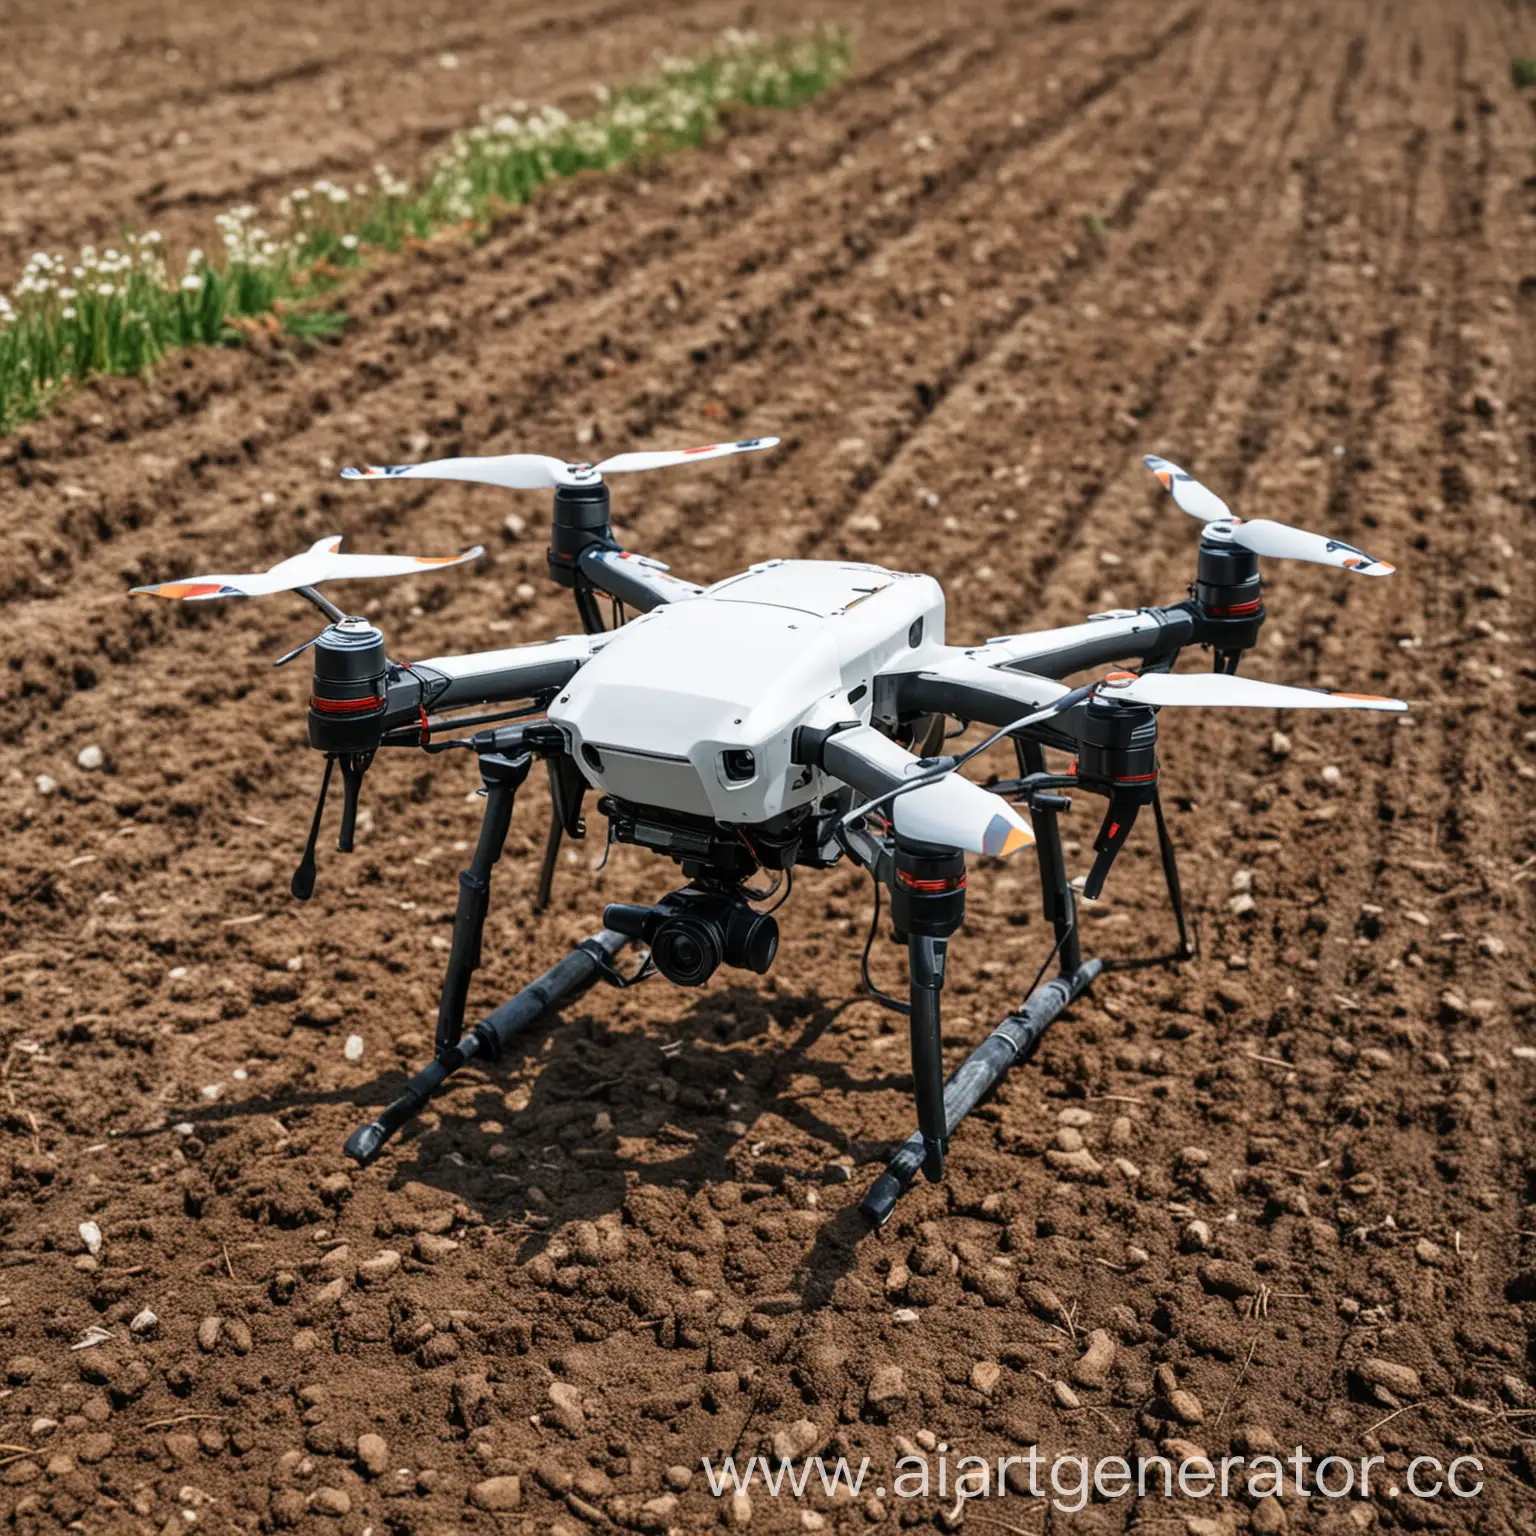 CloseUp-View-of-Agricultural-Drone-in-Spring-Field